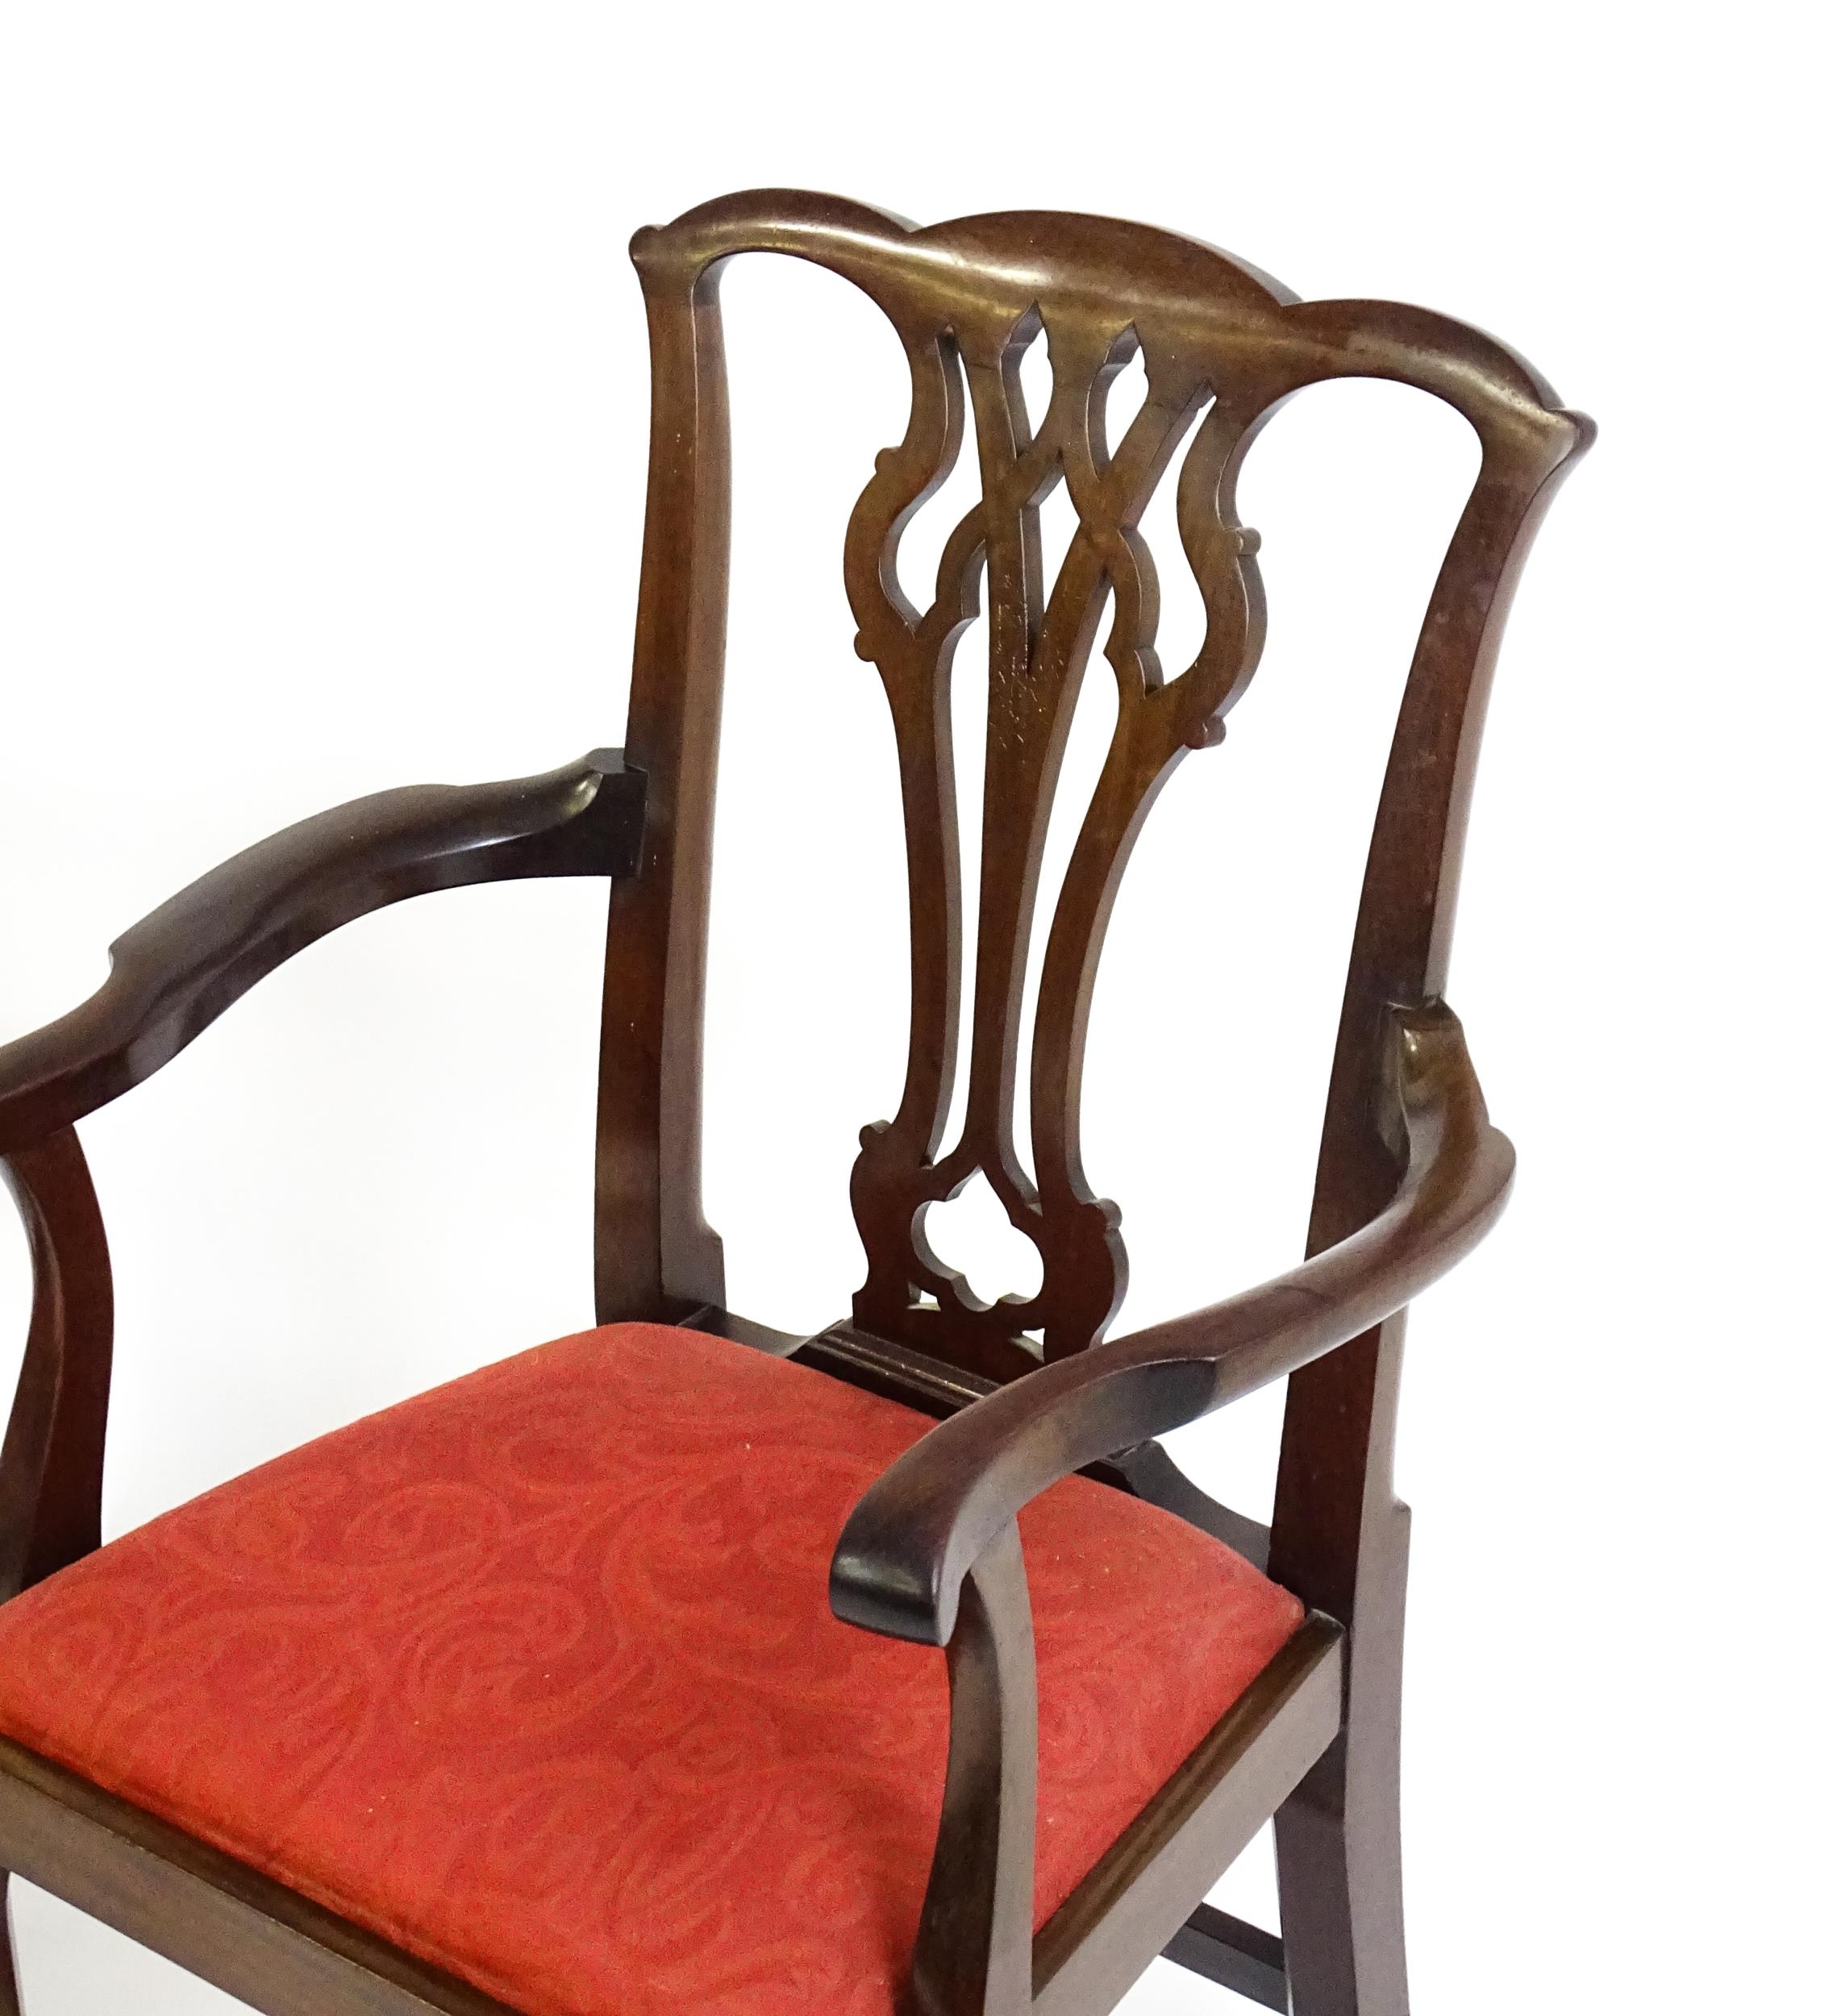 A pair of Chippendale style mahogany elbow chairs with a drop in seat raised on chamfered legs - Image 3 of 7